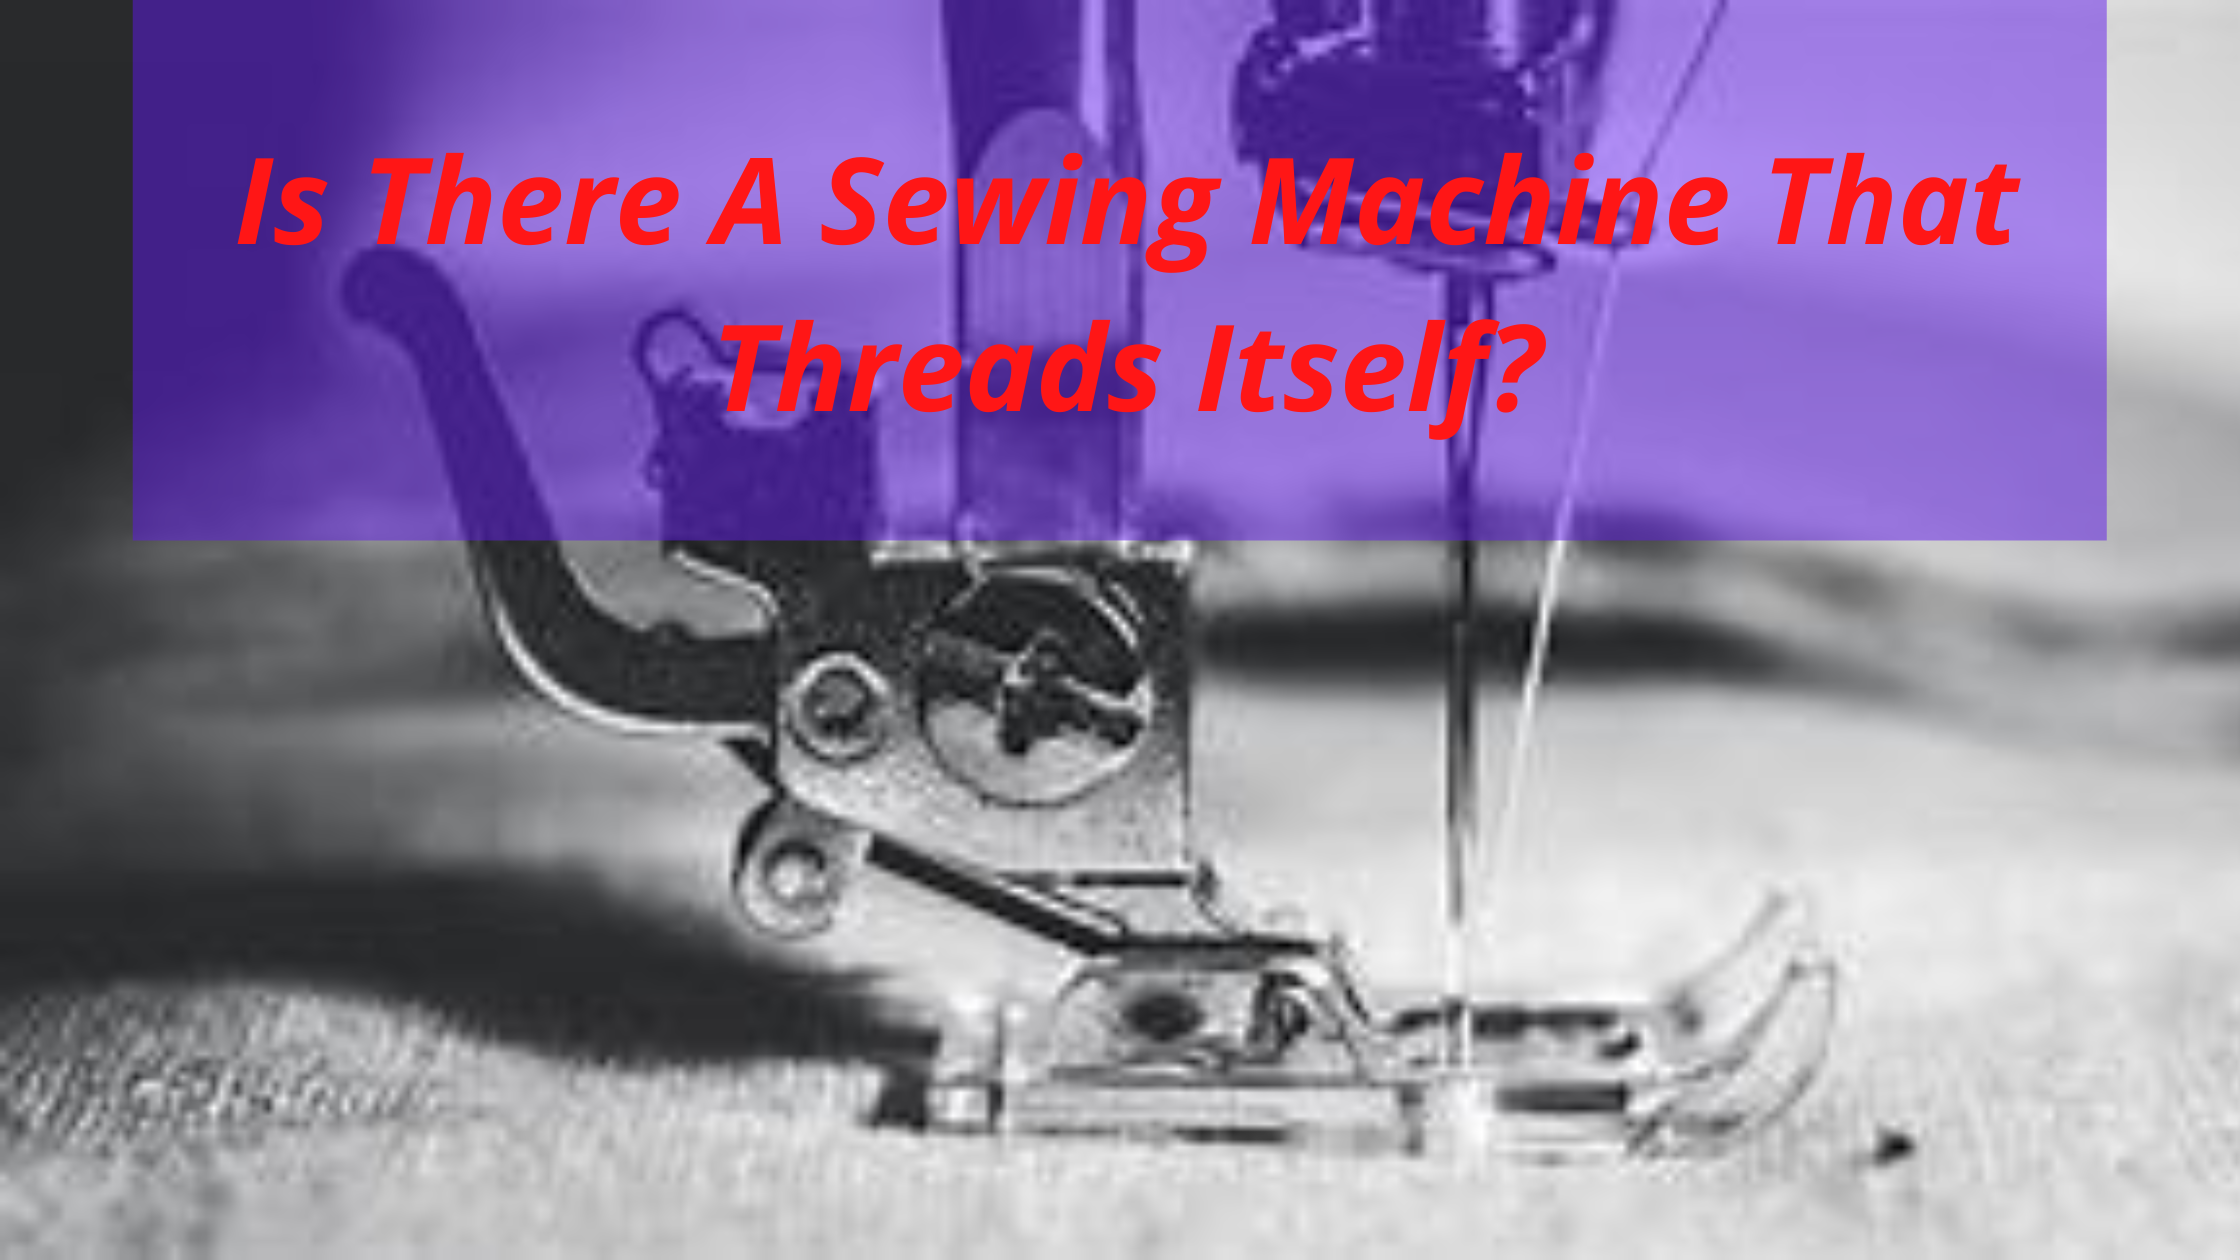 Is There A Sewing Machine That Threads Itself?